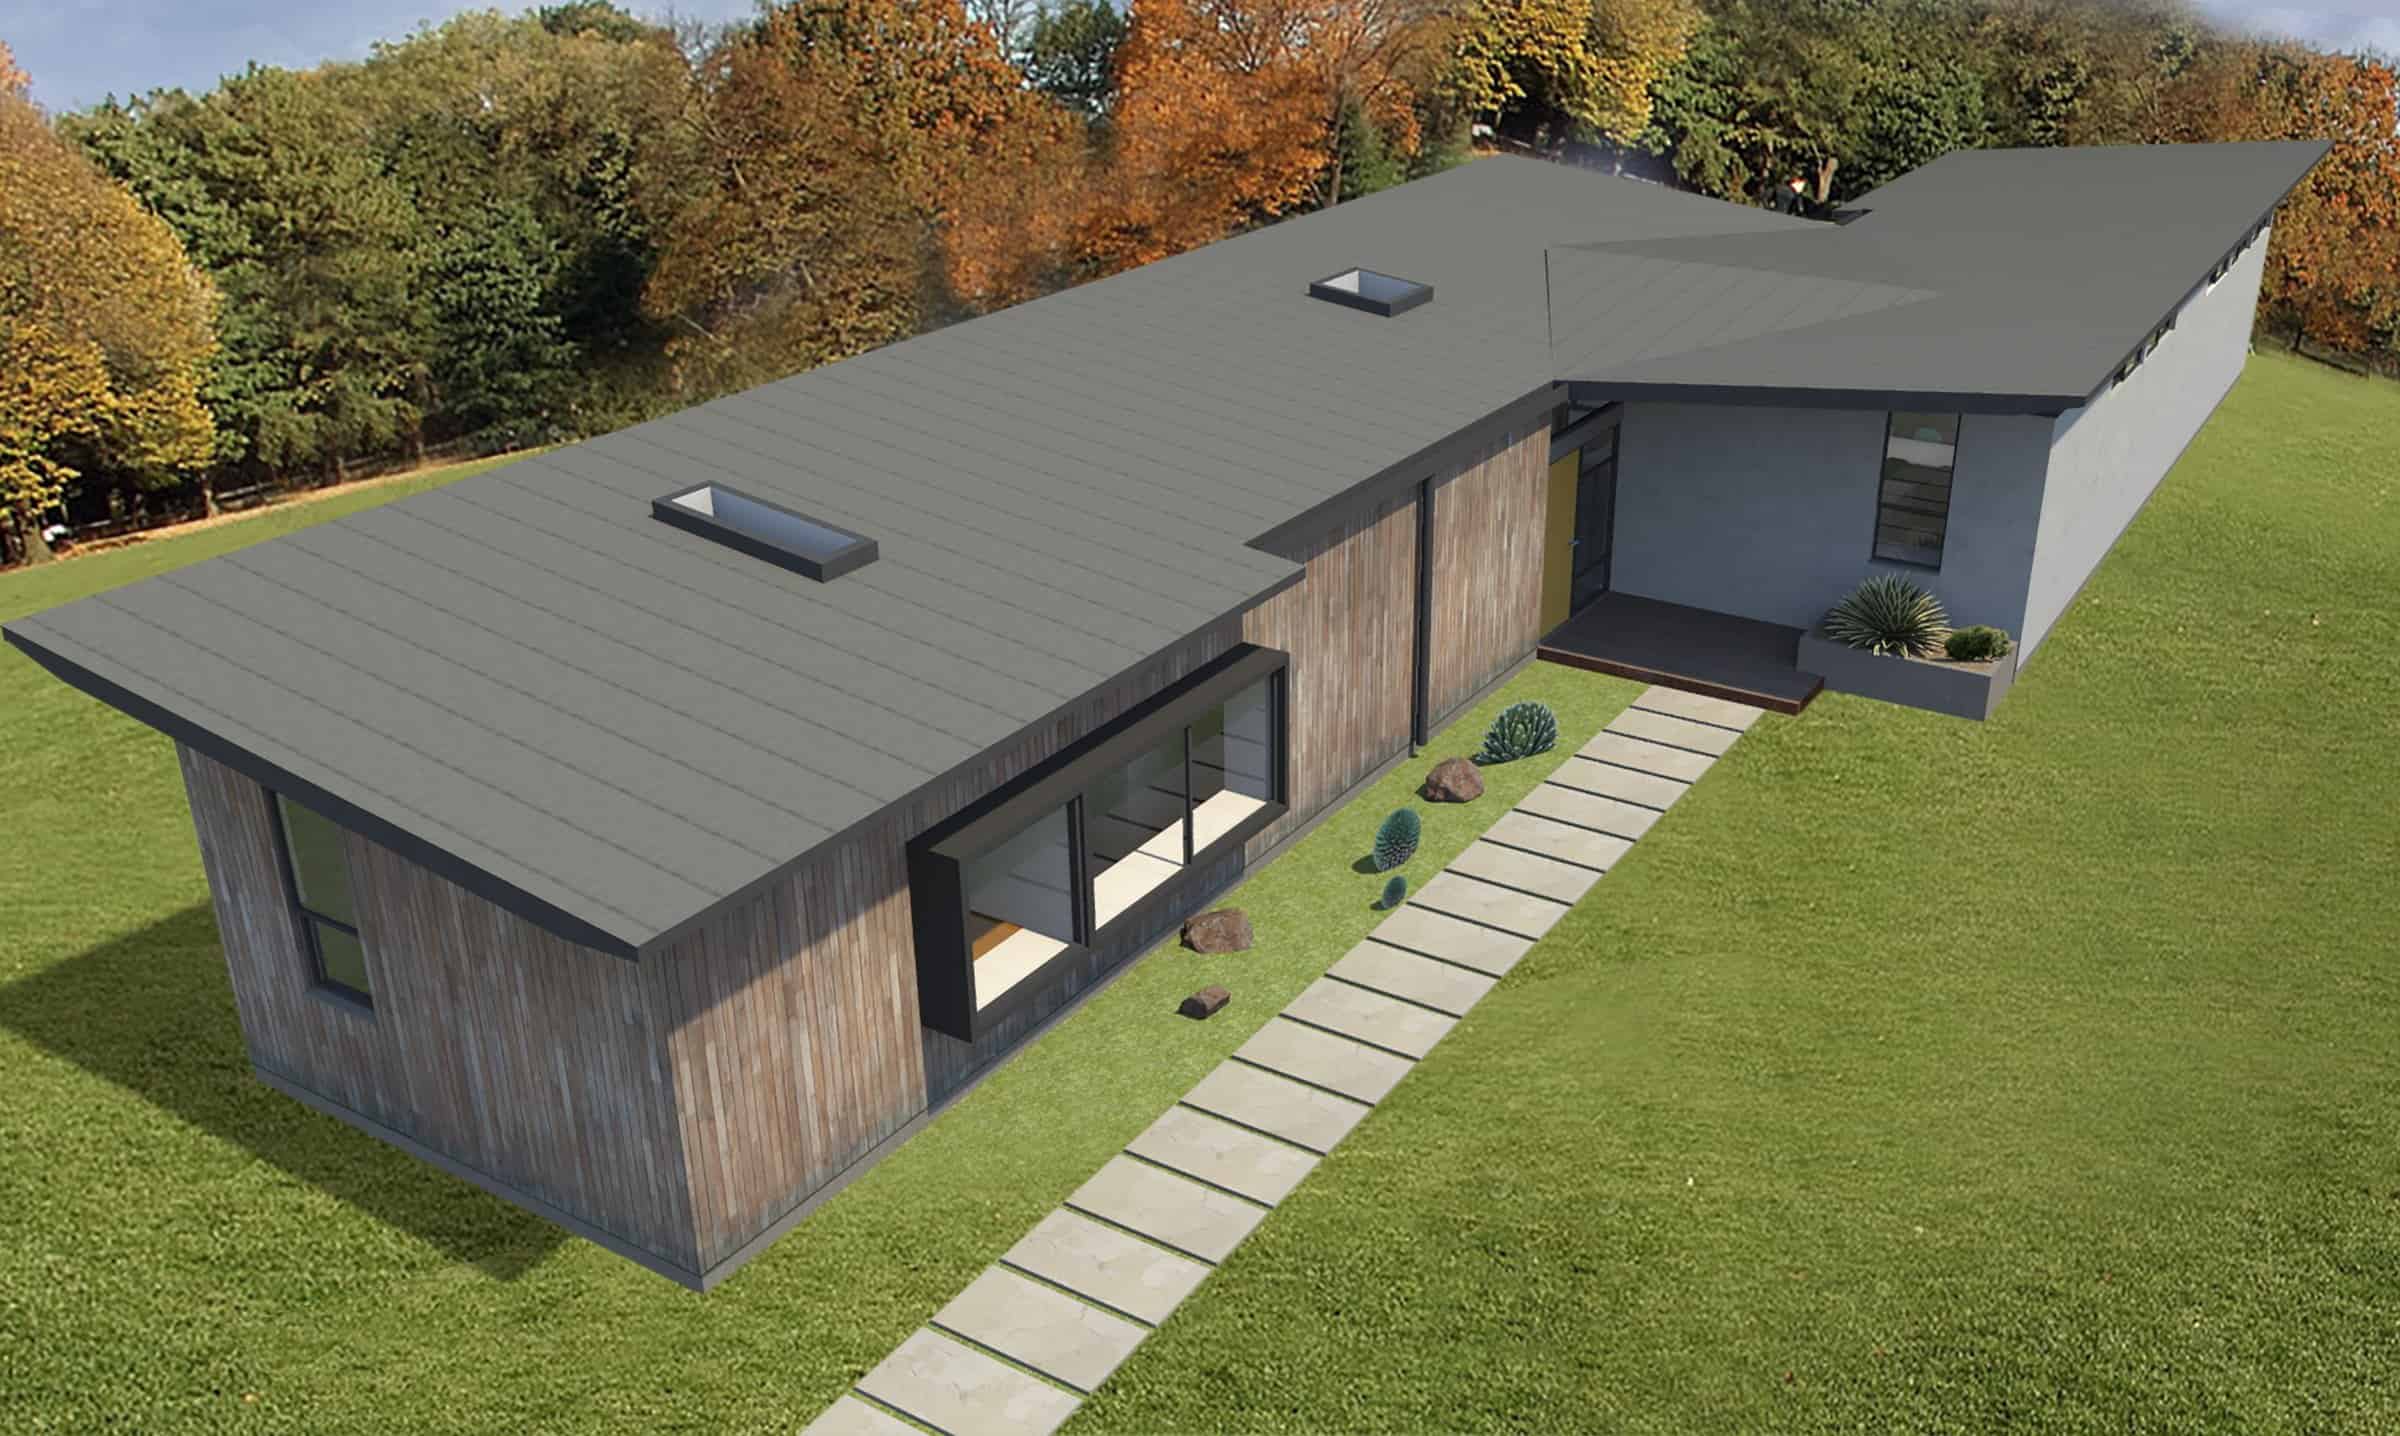 MA Modular C Plan modern prefab home model rendering with view of exterior from above.